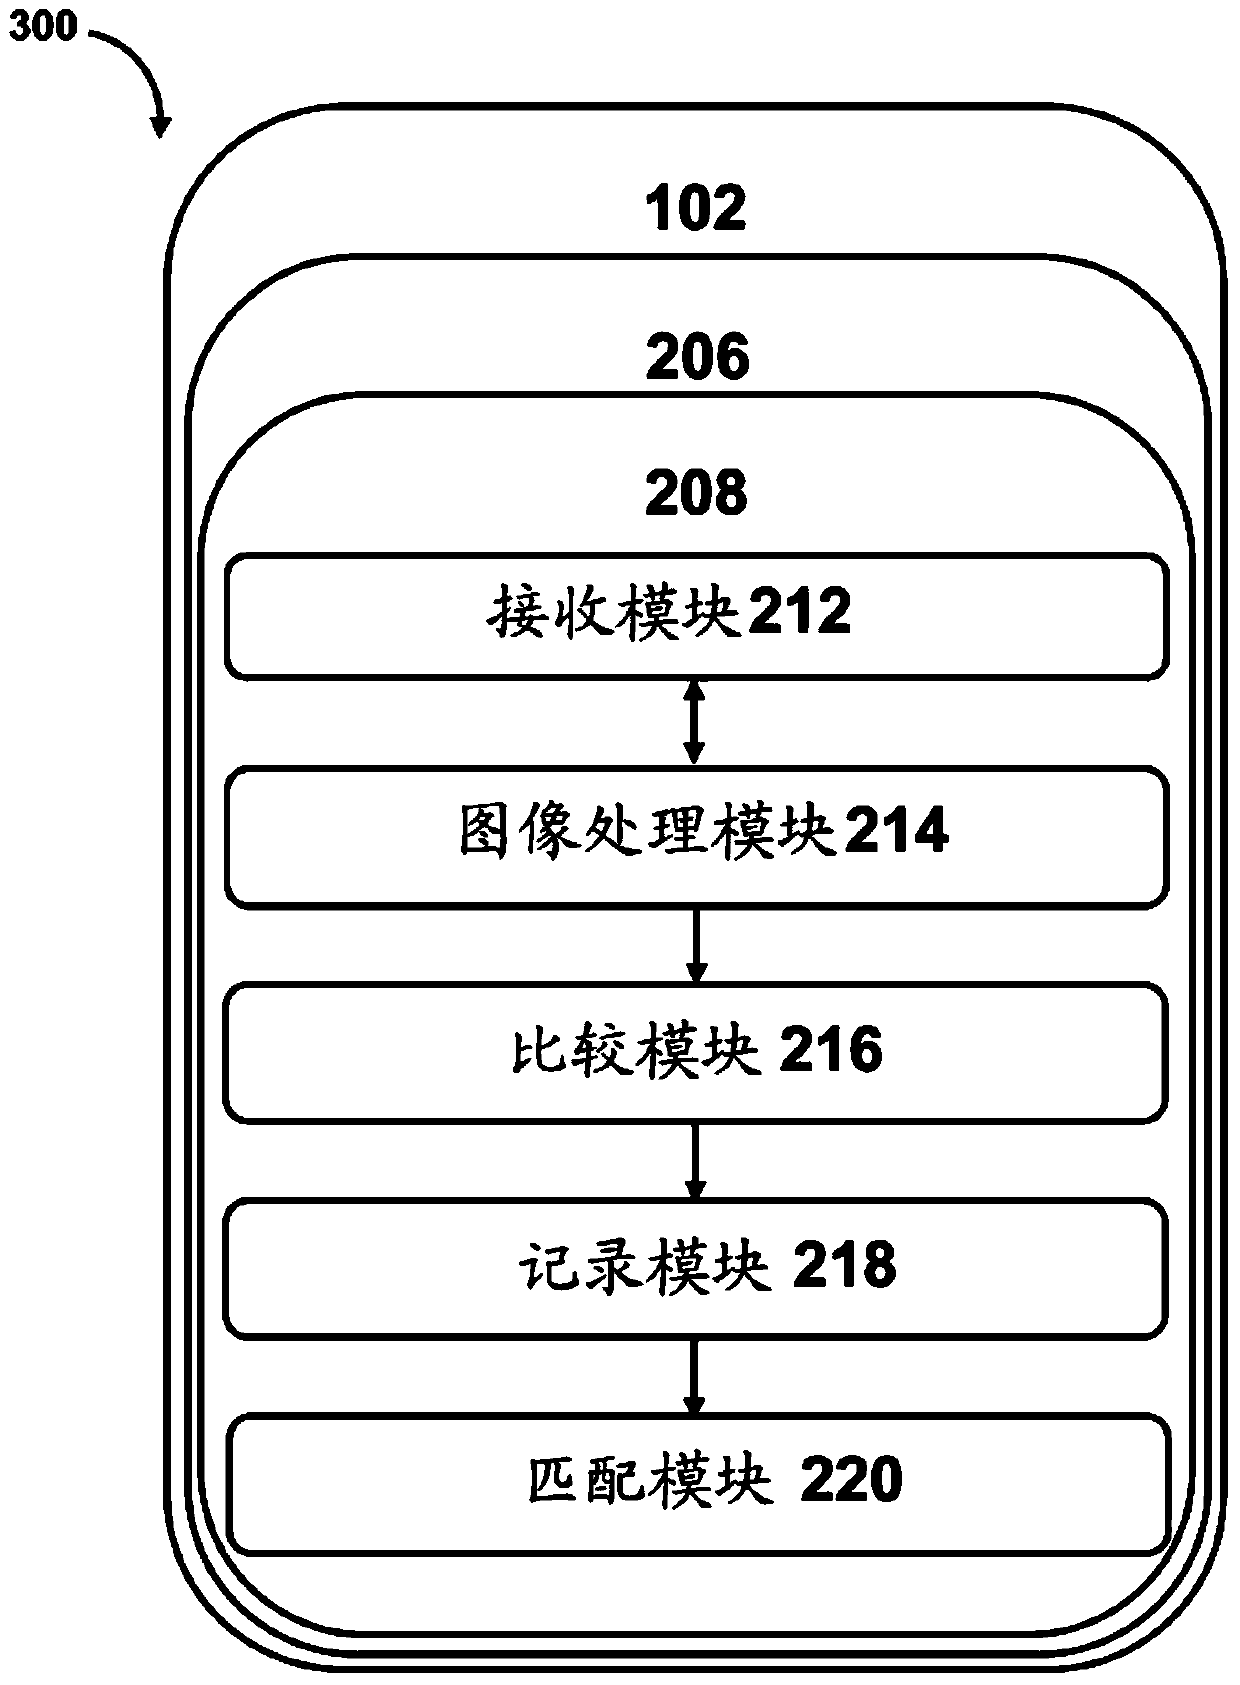 Method and system for automatic selection of one or more image processing algorithm